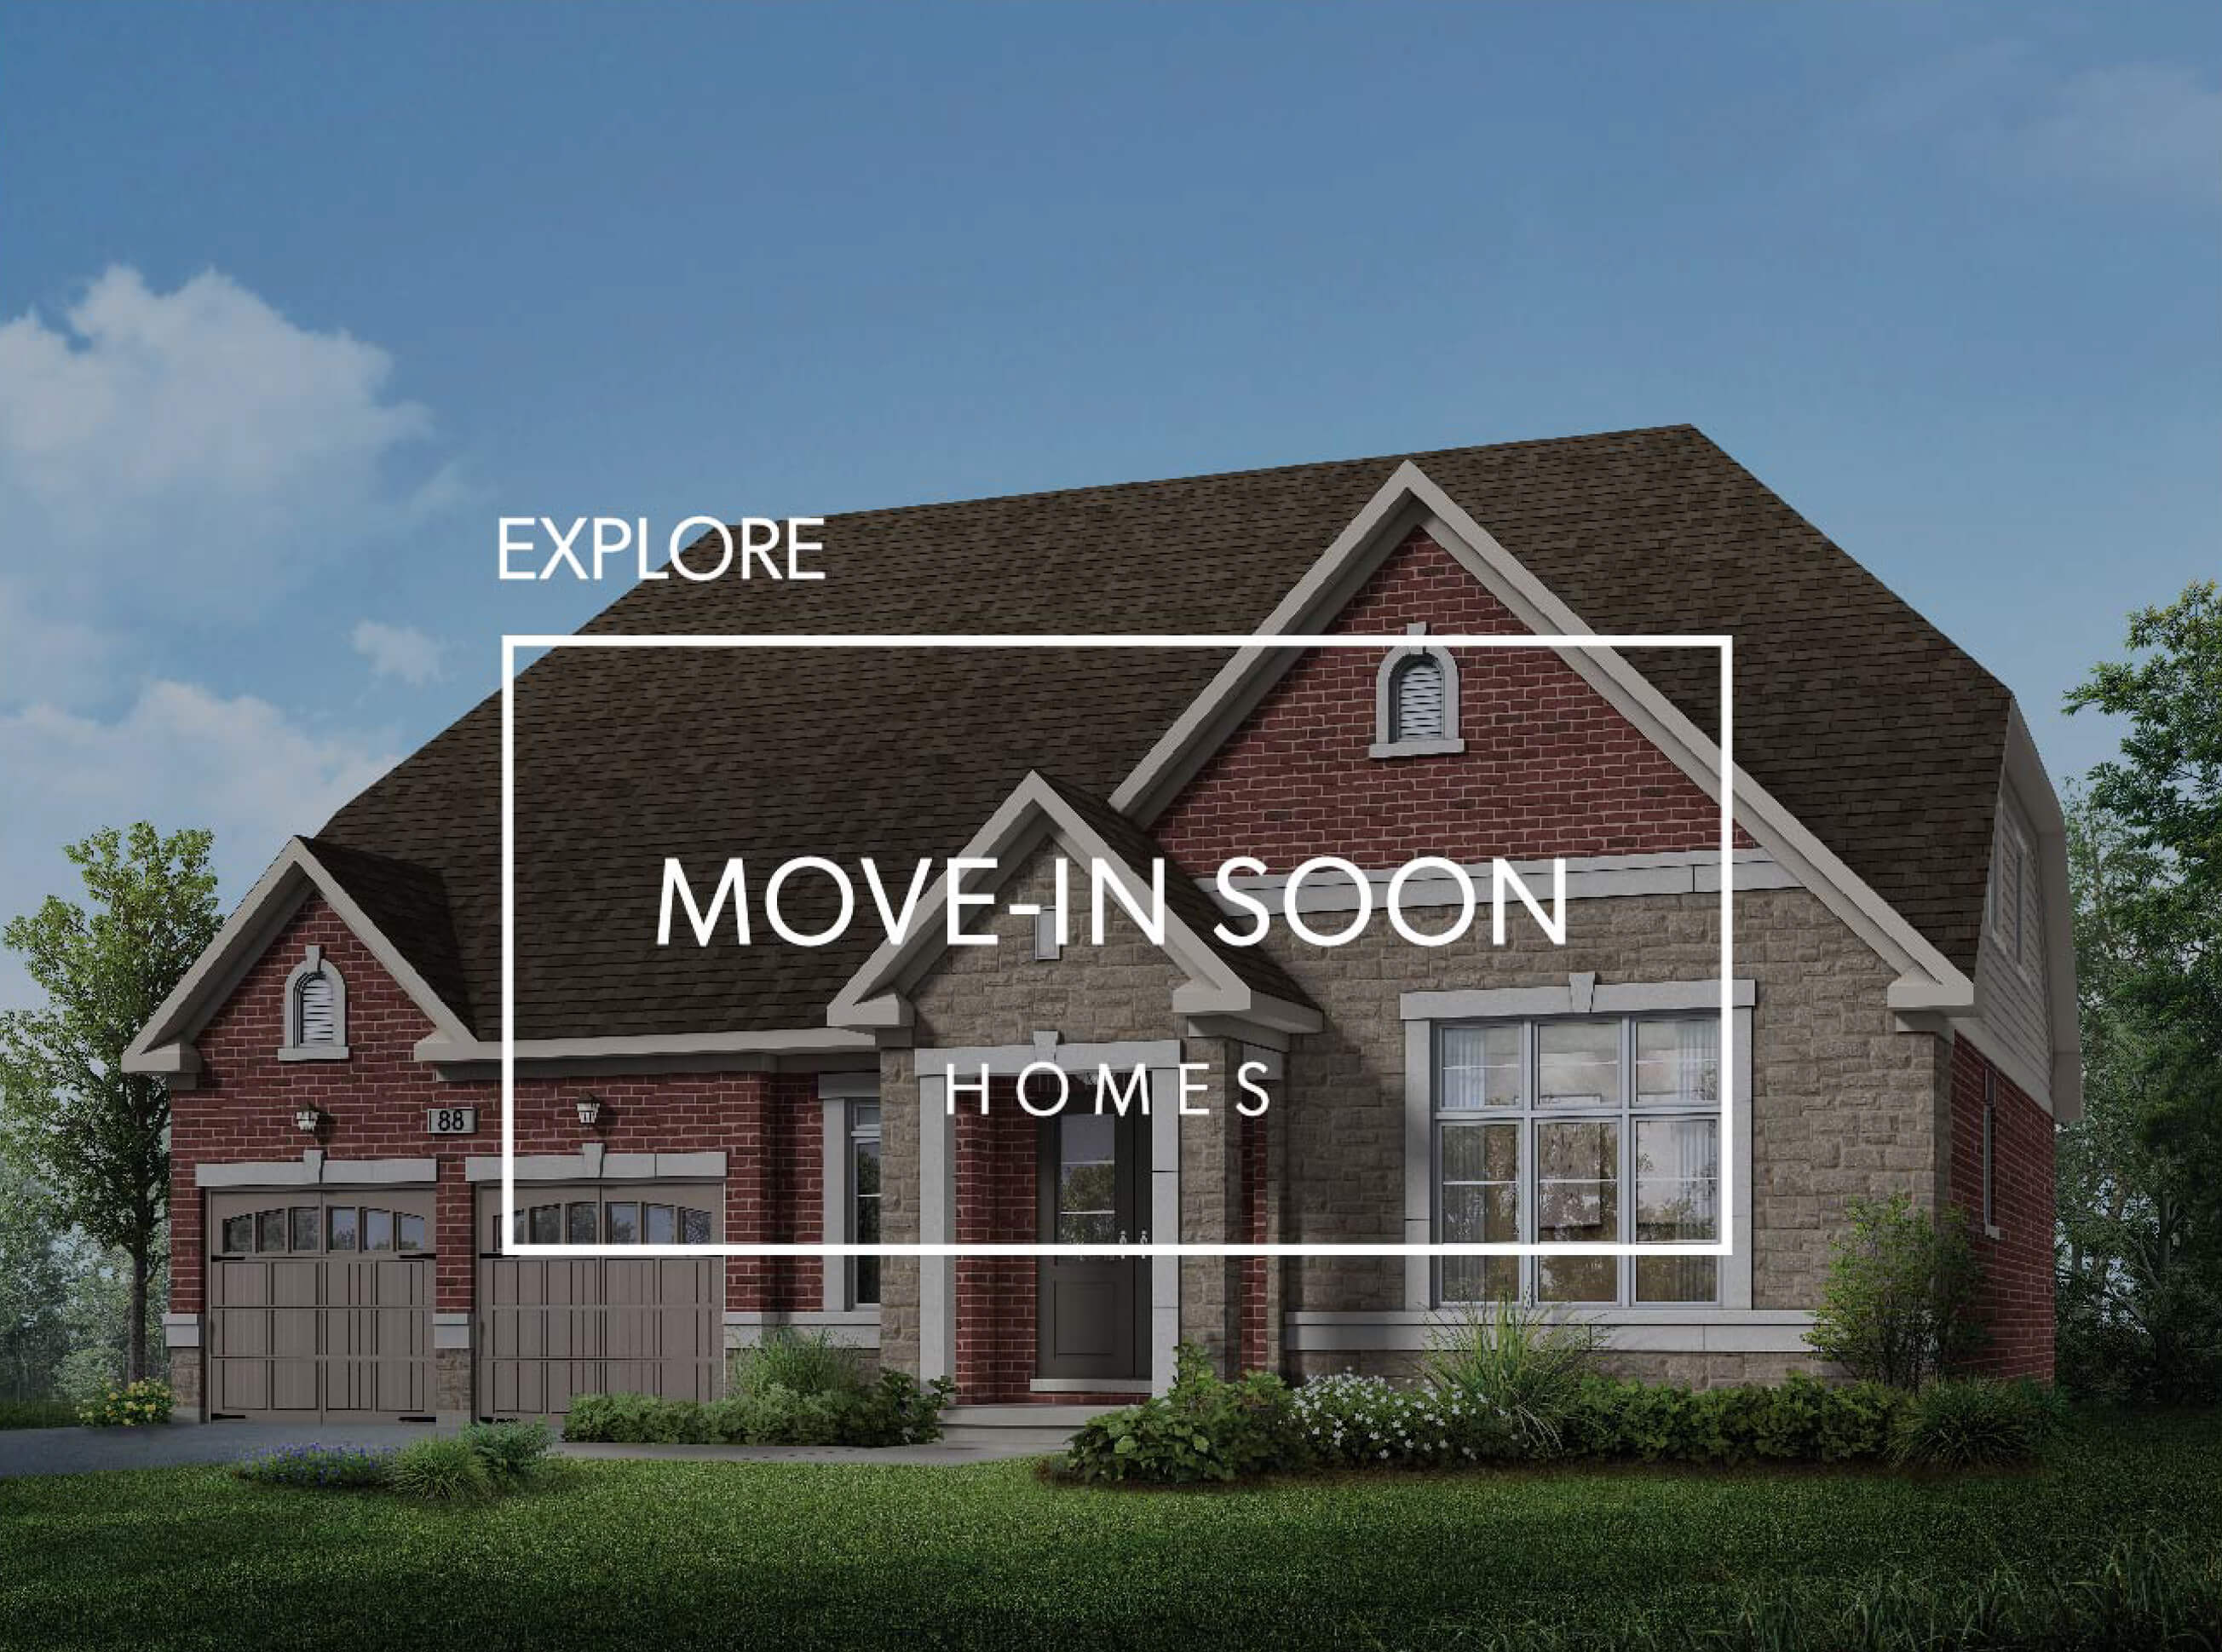 Move-In Soon Homes